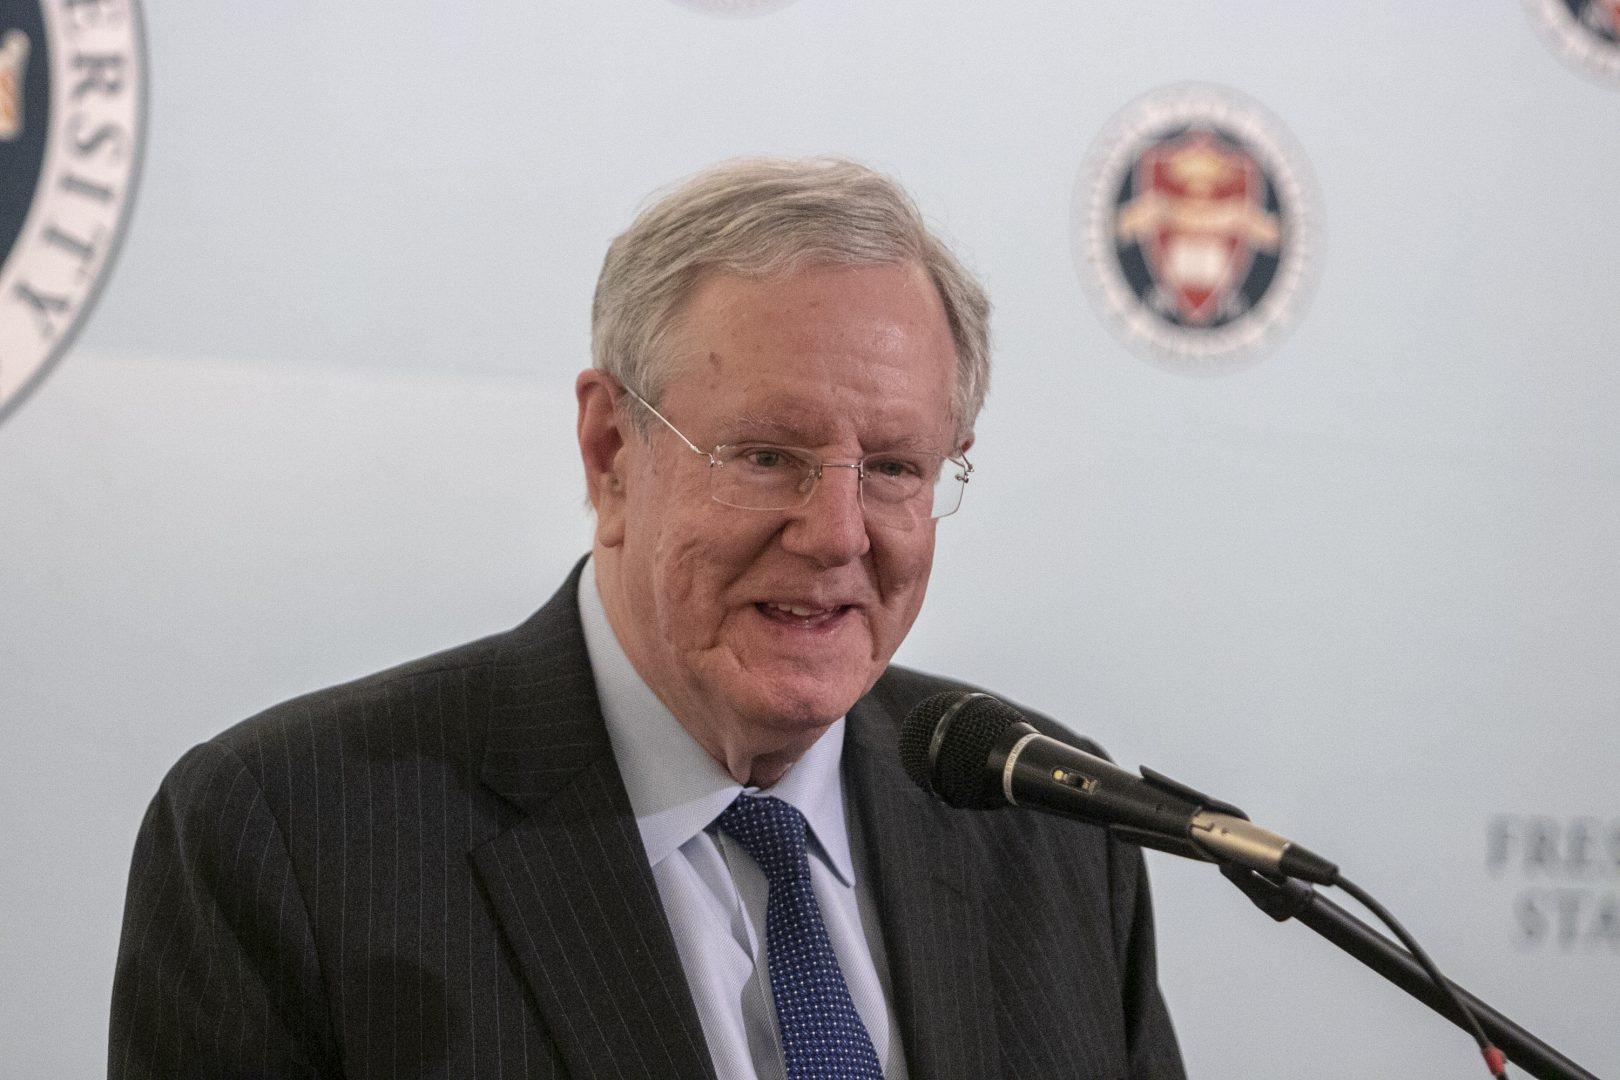 Steve Forbes, Editor-in-Chief of Forbes Media, speaks at a press conference before his lecture at Save Mart Center on Monday, March 25, 2019. (Larry Valenzuela/ The Collegian) 